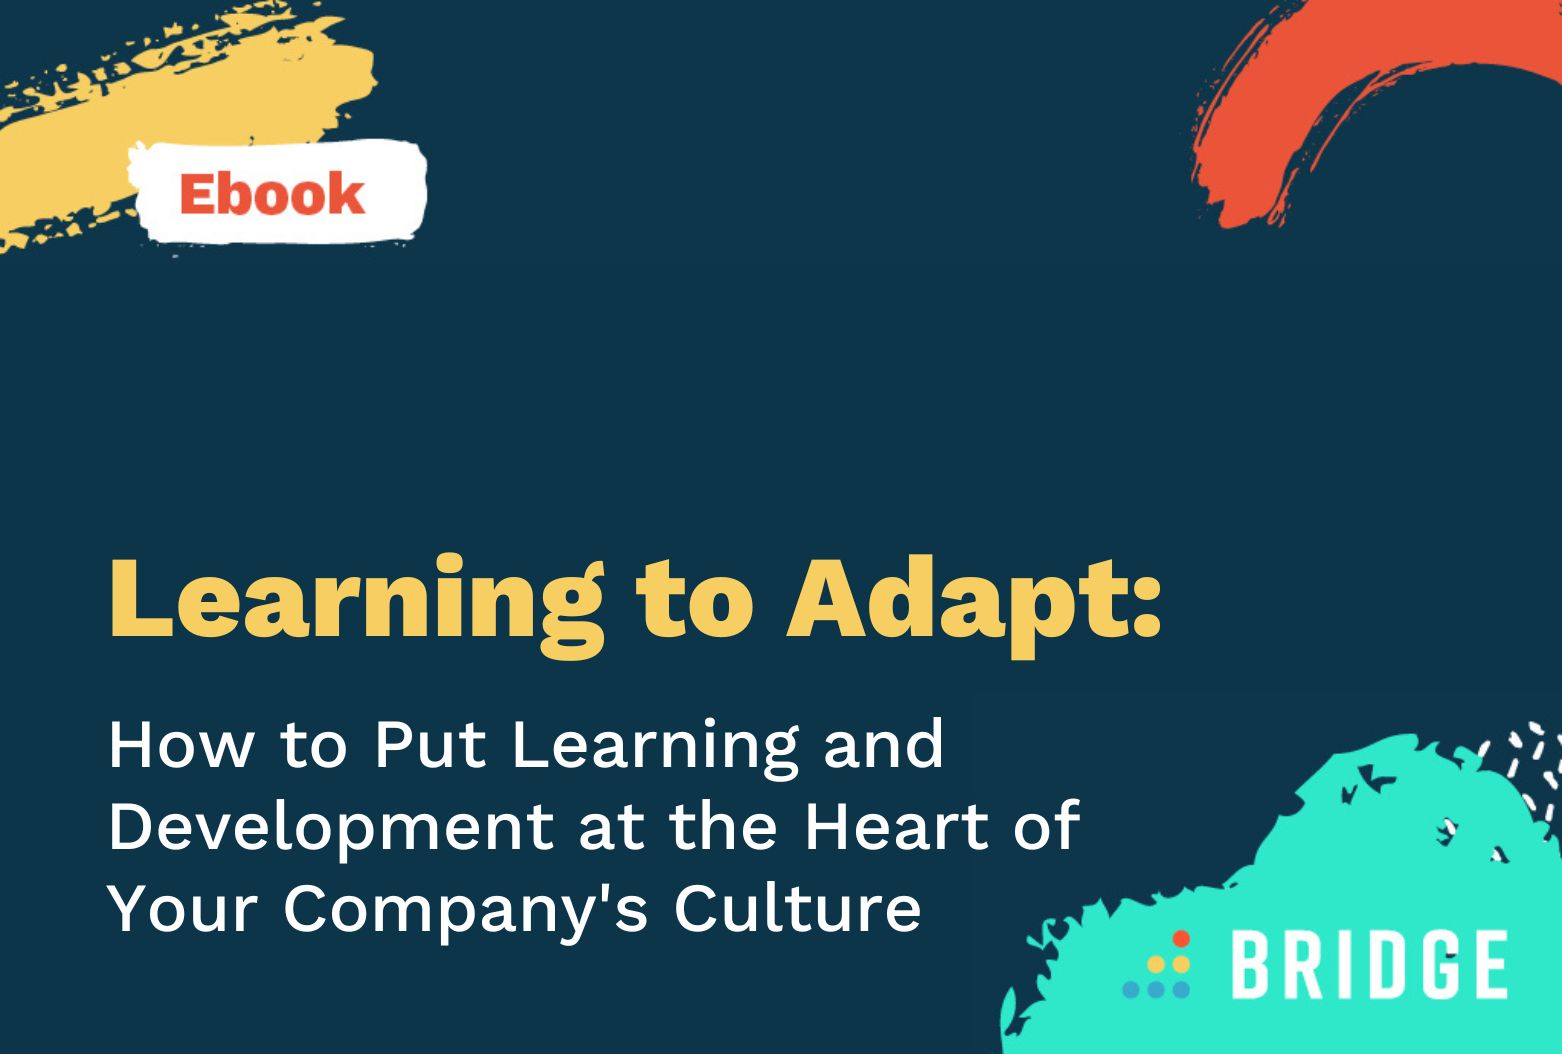 how to put learning and development at the heart of your company culture